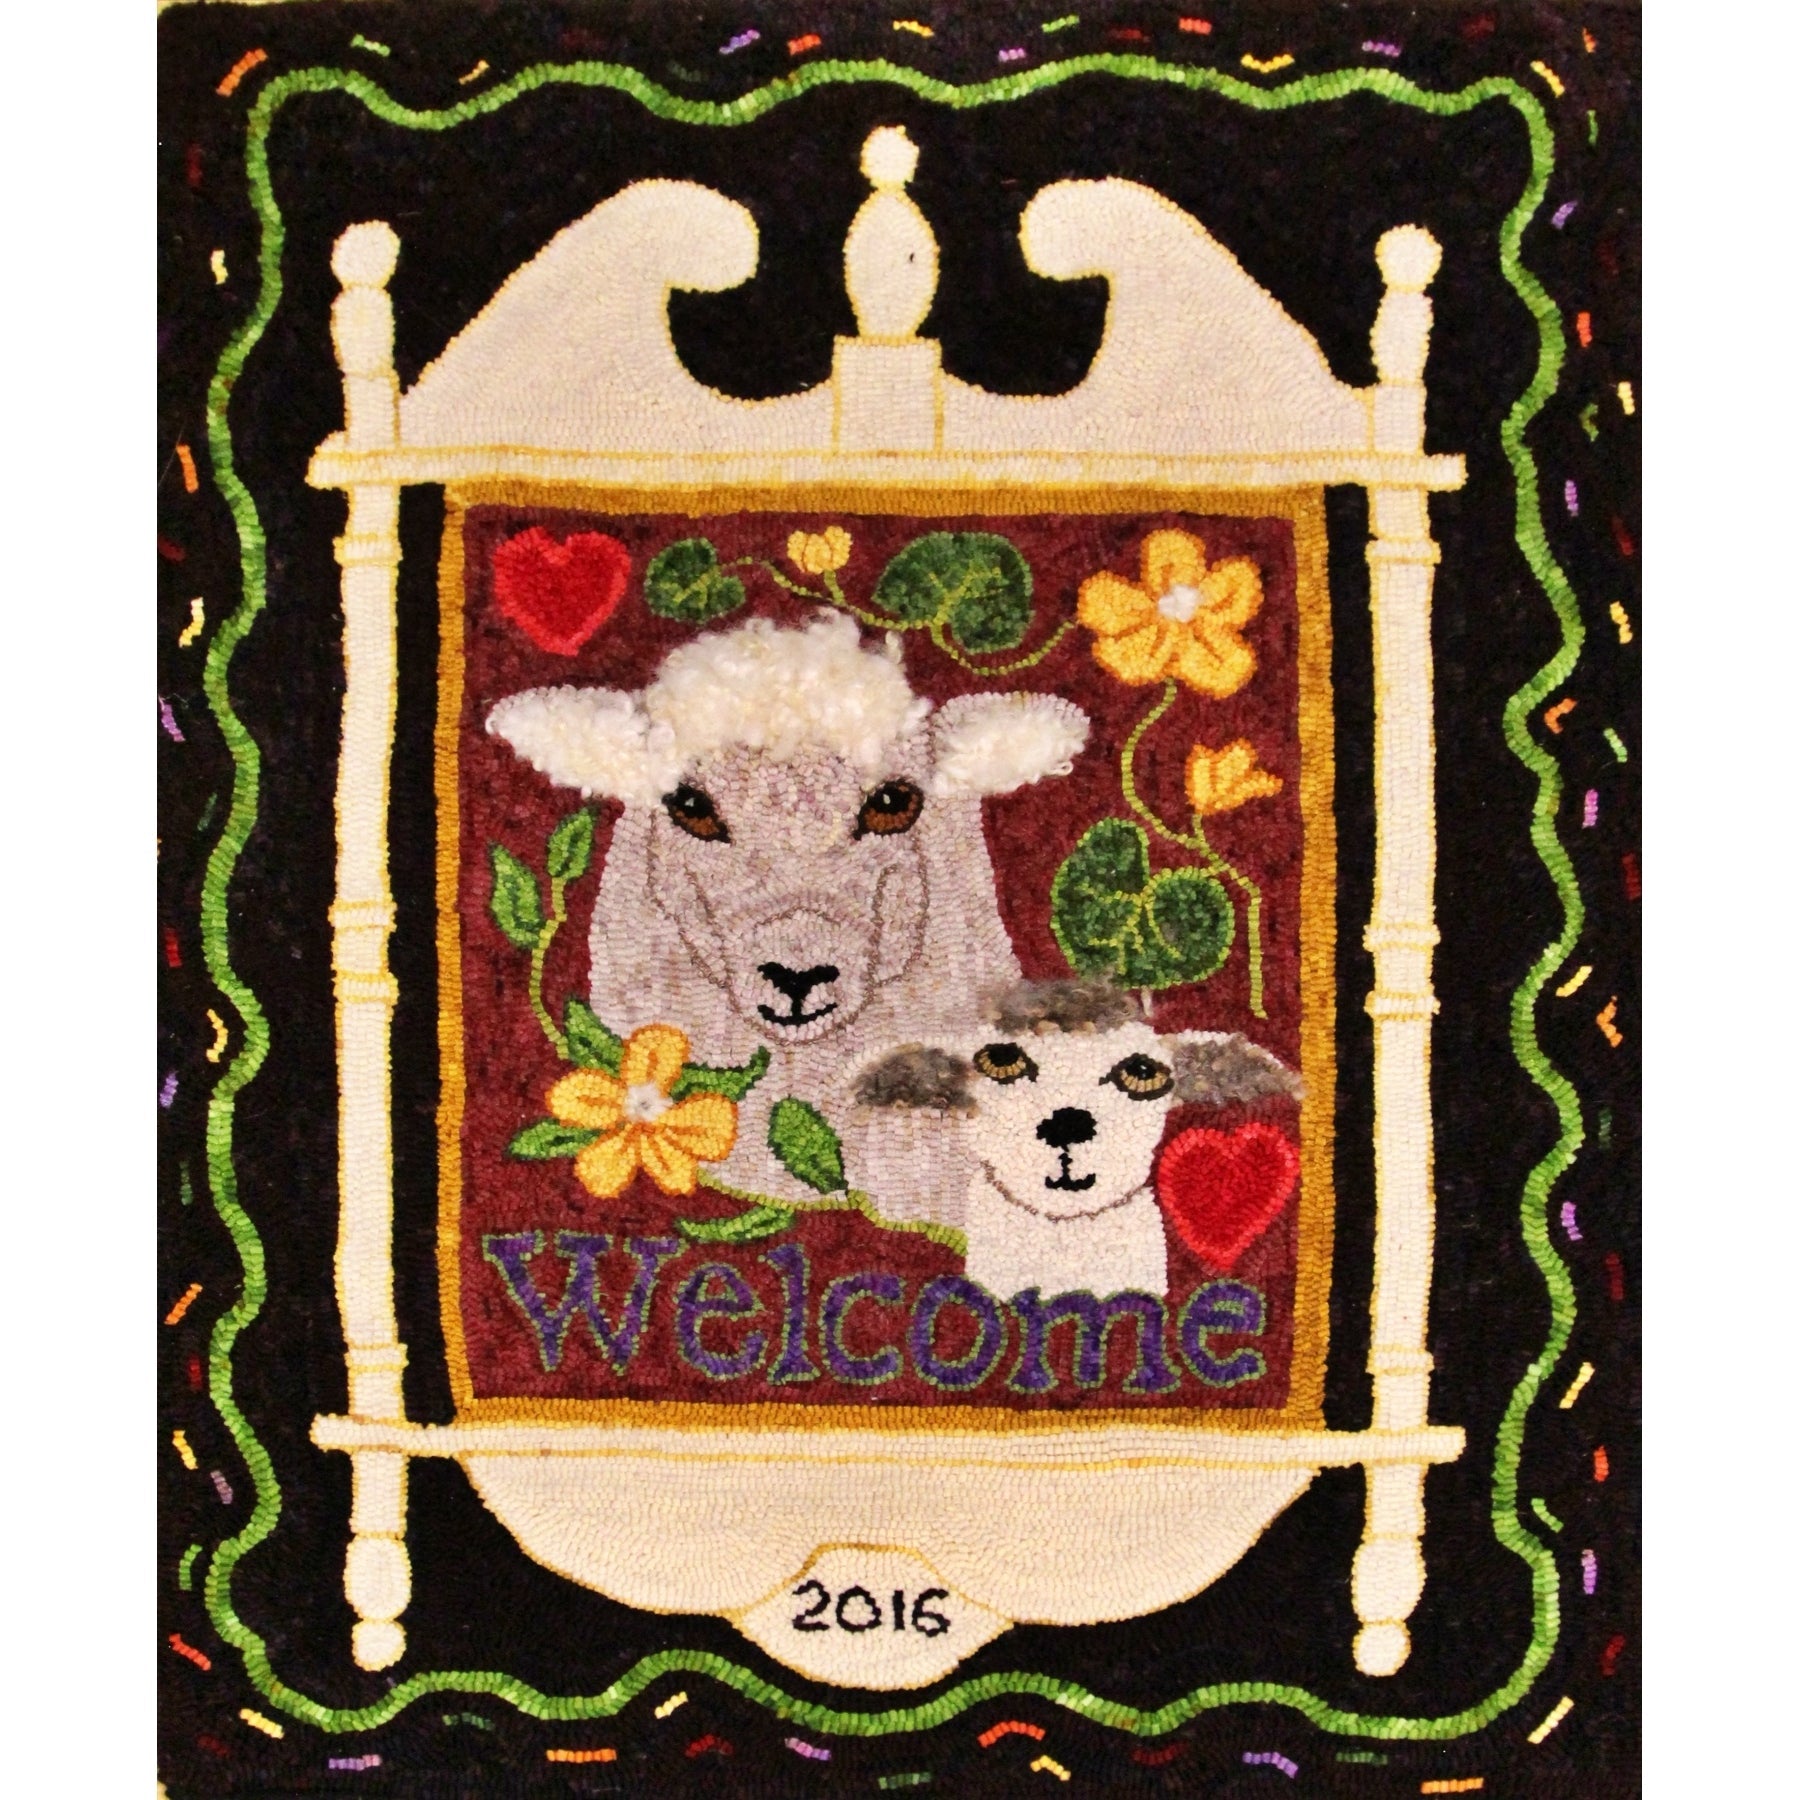 A Wooly Welcome, rug hooked by Bonnie Roycewky